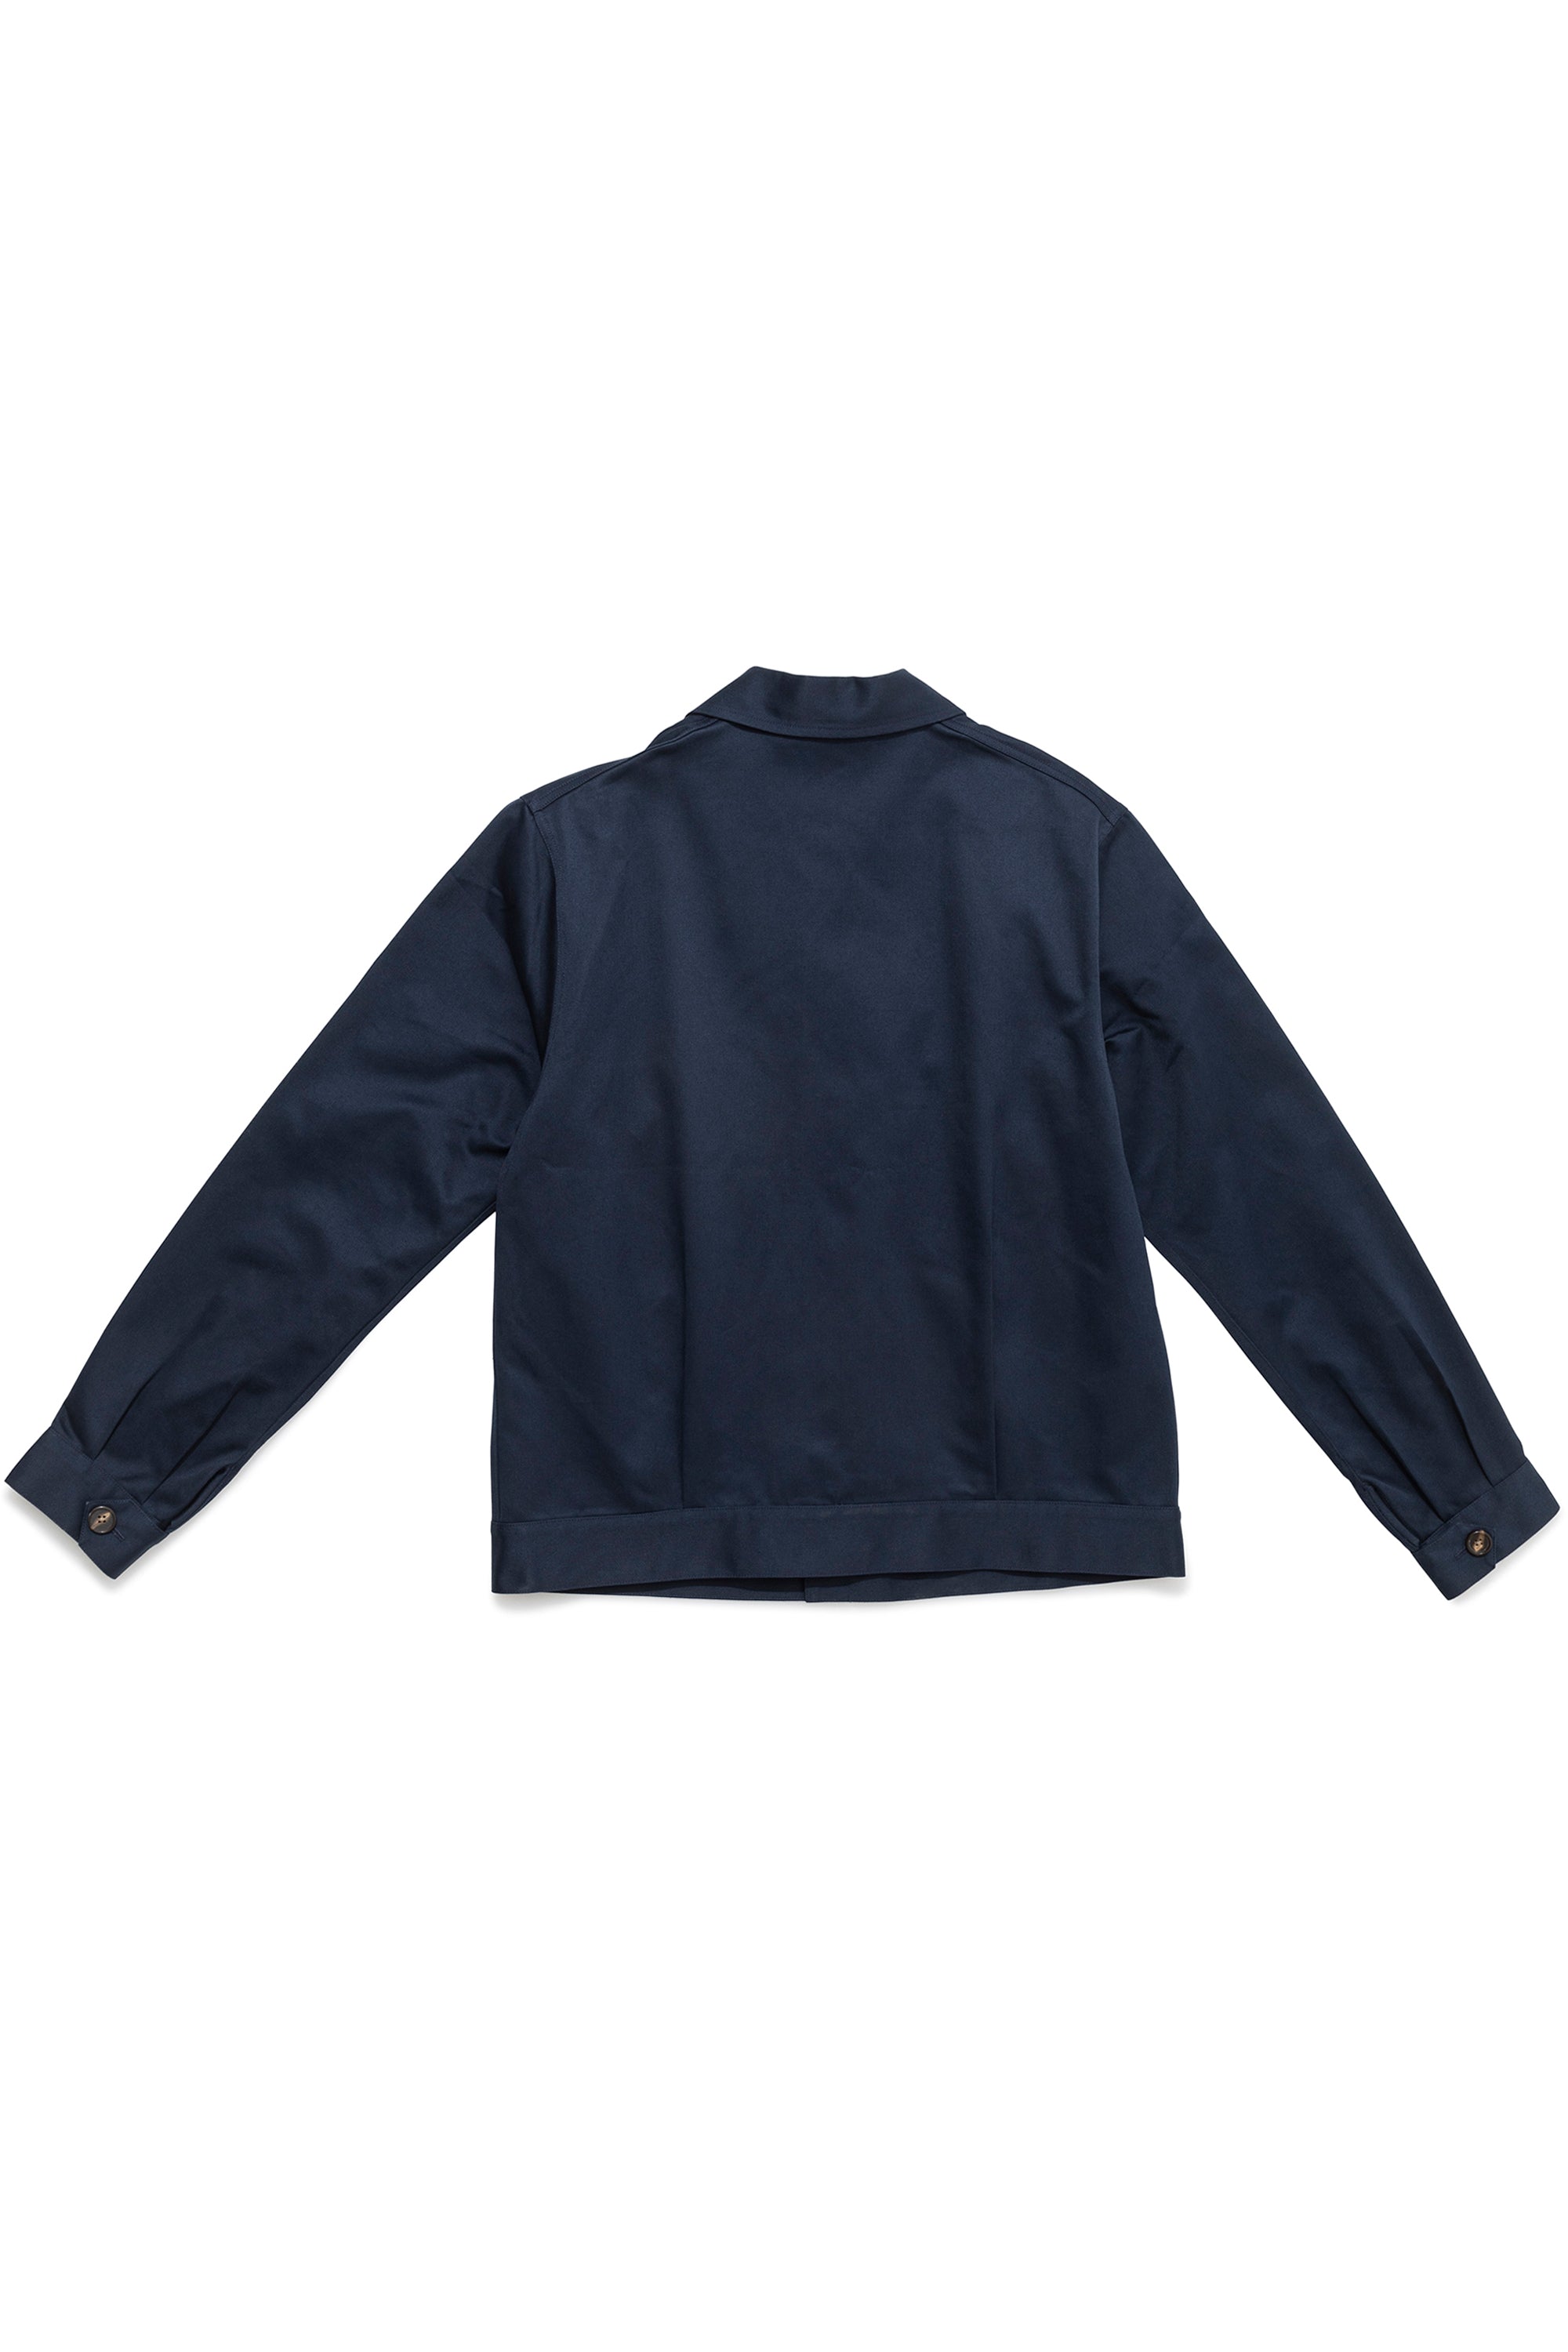 The Armoury 11-A011B Sport Navy Cotton Road Jacket